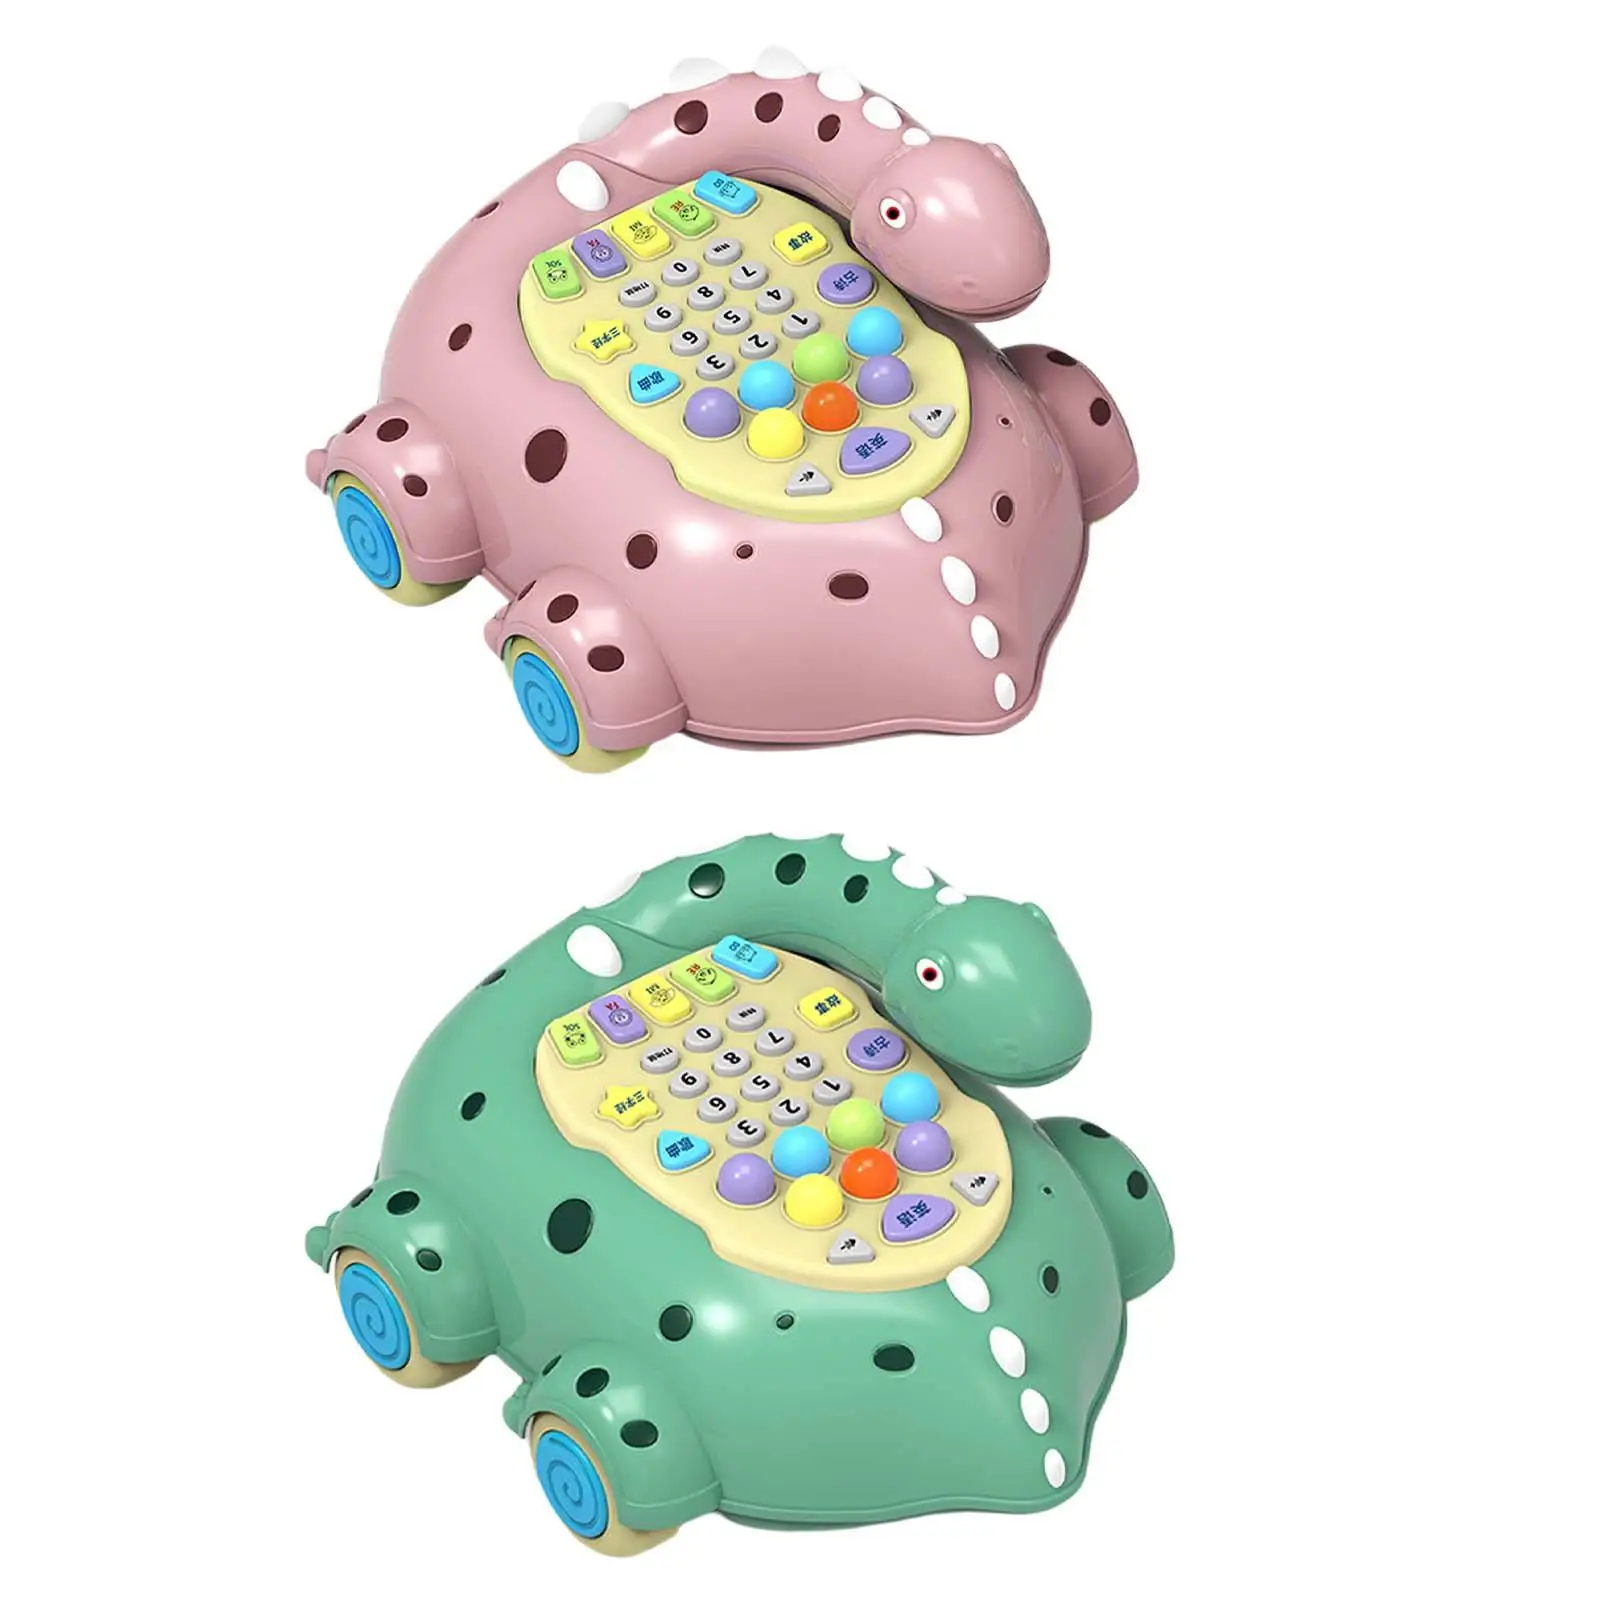 Baby Musical Toys music Light Phone Toy for Education Preschool Learning